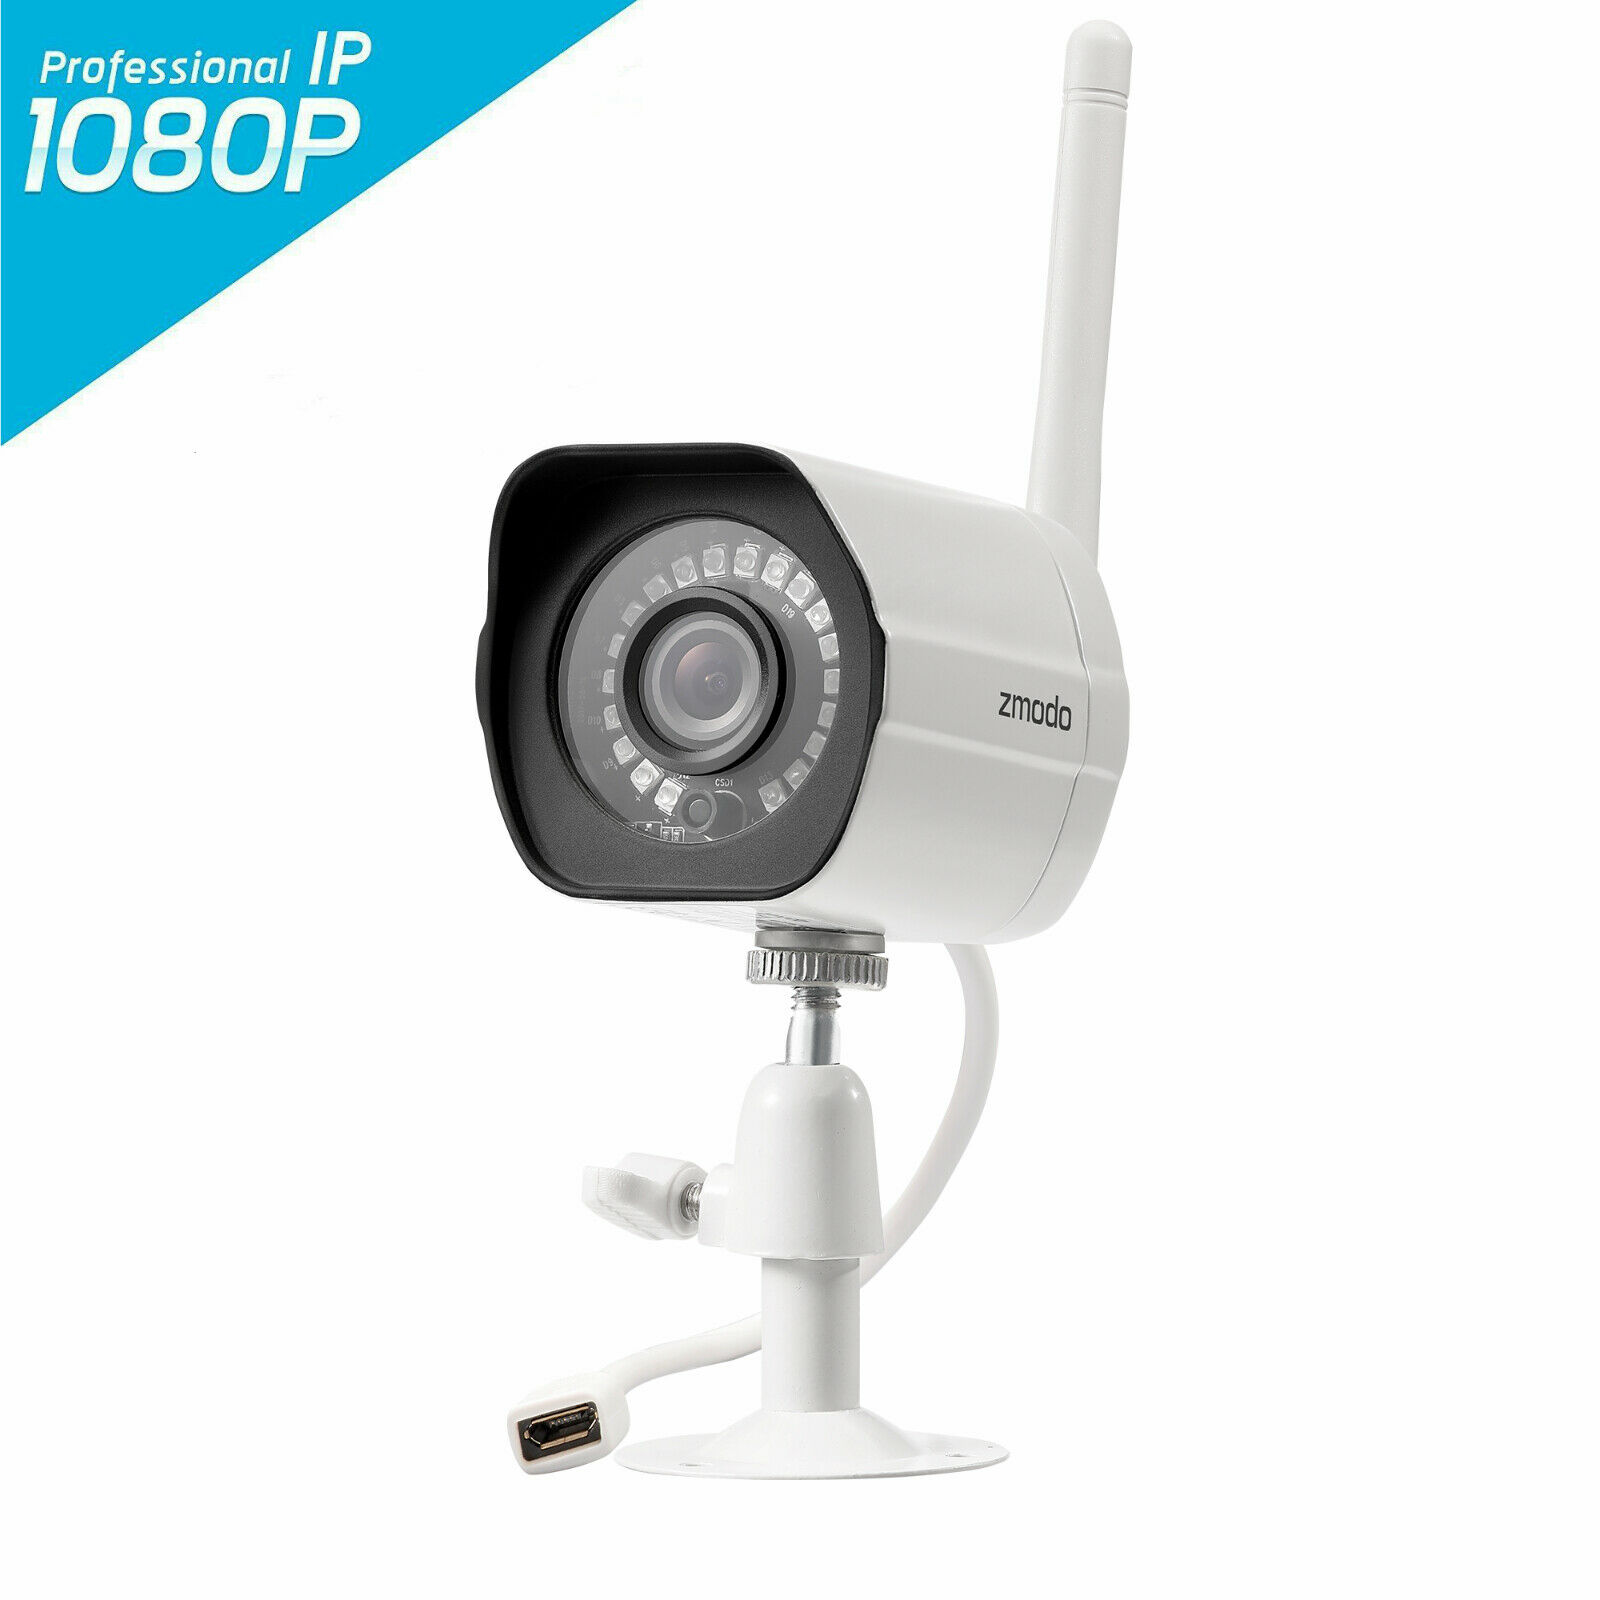 Zmodo 1080p Indoor/outdoor Wifi Home Video Security Ip Camera With Night Vision